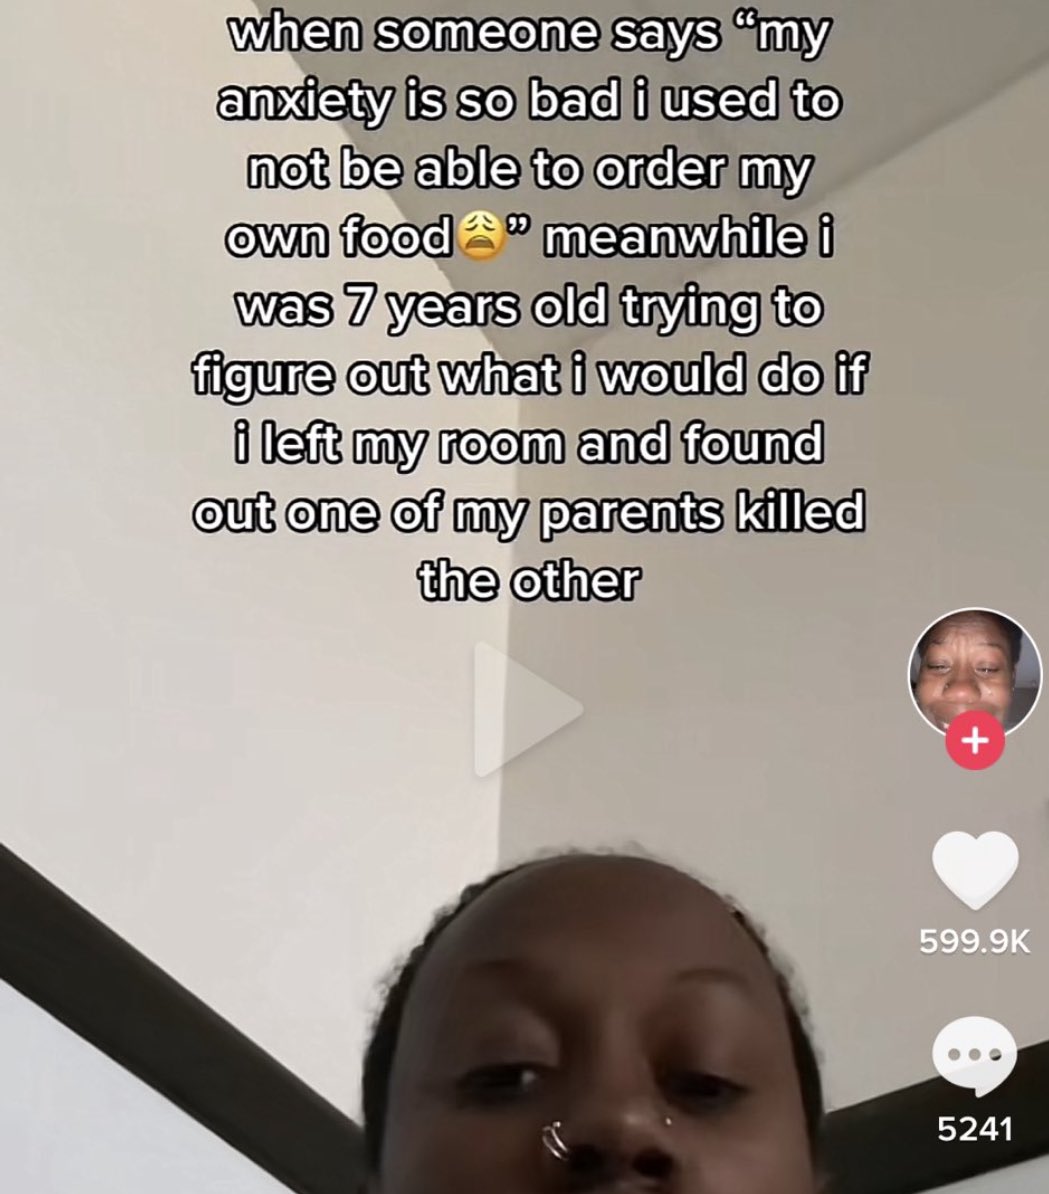 chaotic tiktok screenshots - photo caption - when someone says "my anxiety is so bad i used to not be able to order my own food" meanwhile i was 7 years old trying to figure out what i would do if i left my room and found out one of my parents killed the 